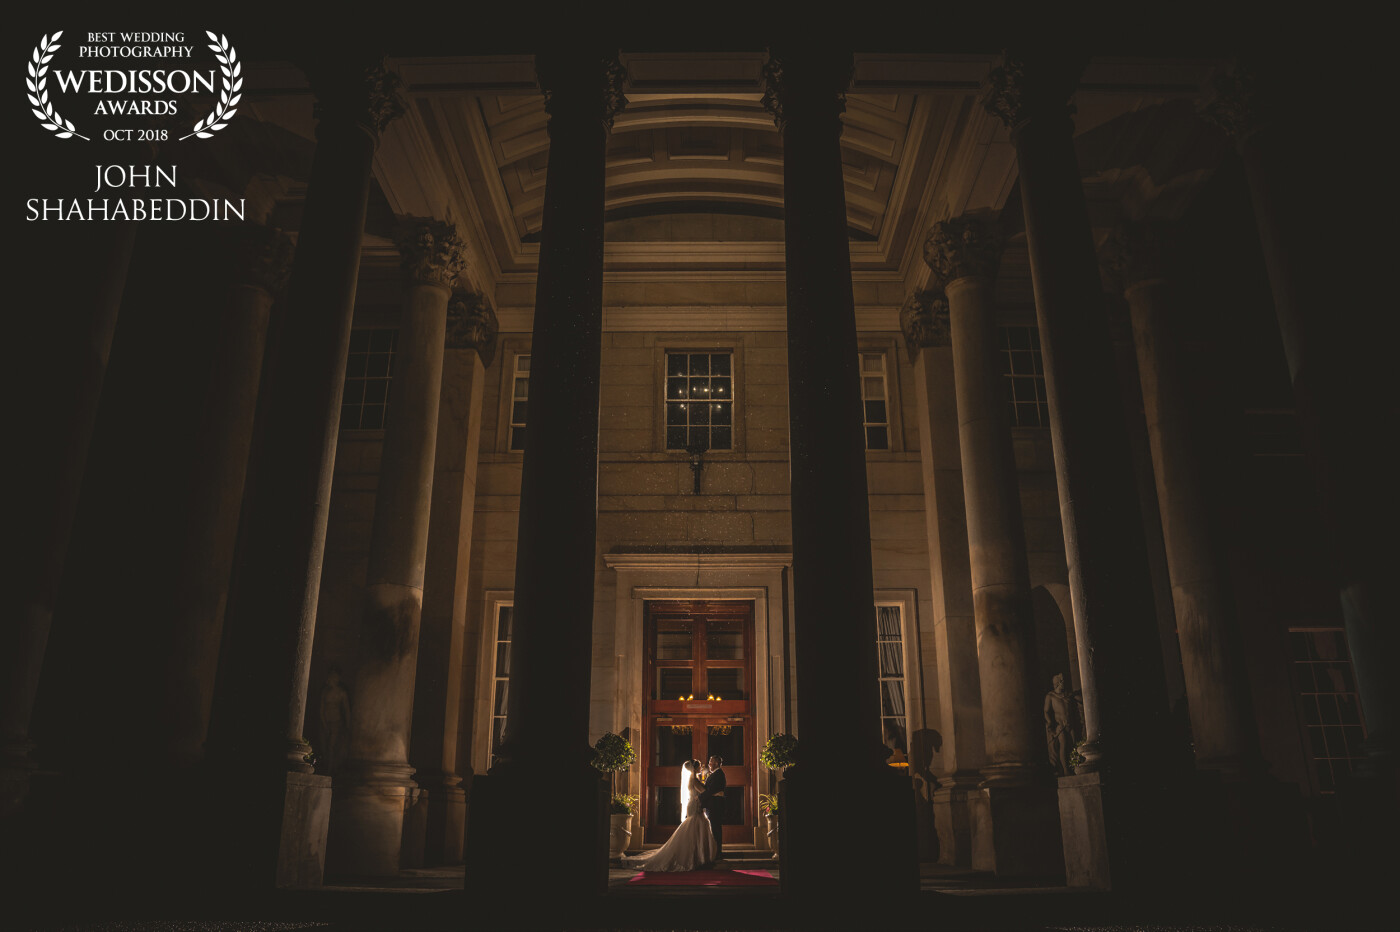 The imposing pillars of the entrance to Wynyard Hall in County Durham just had to be on my shot list for this wedding! And there's no better time to capture them so beautifully than after dark. With some creative lighting, a bit of rain, and a willing couple, the grandeur of this amazing country house was captured in all its glory.